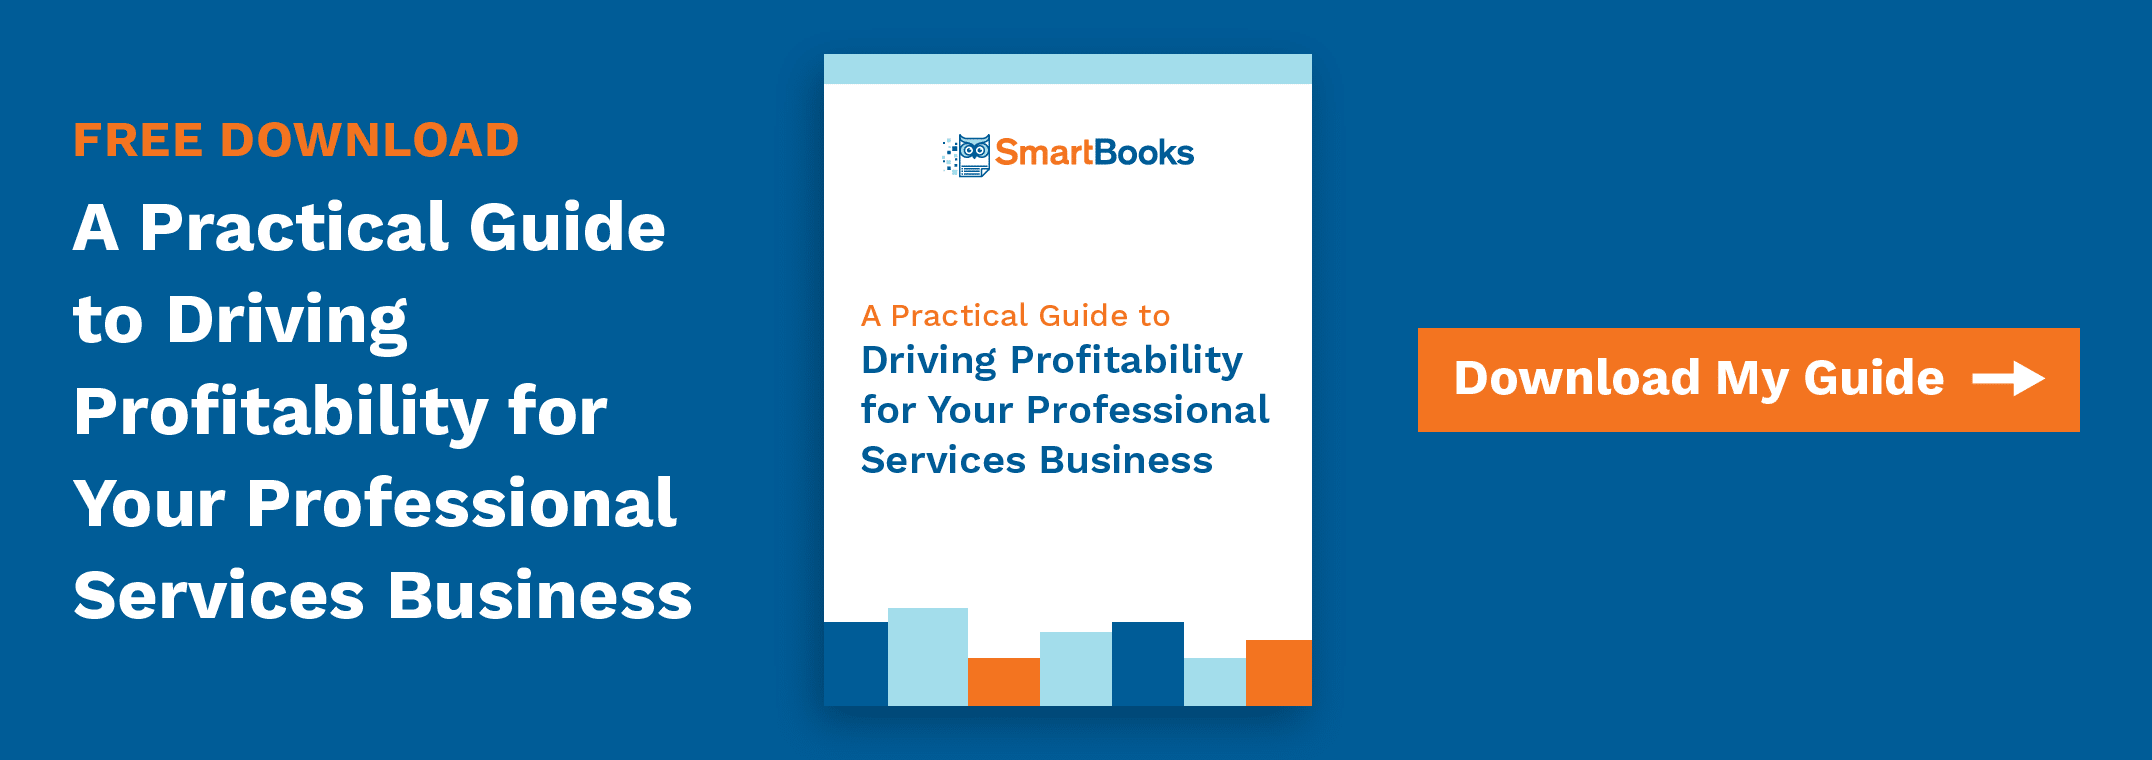 Driving Profitability for Your Professional Services Business